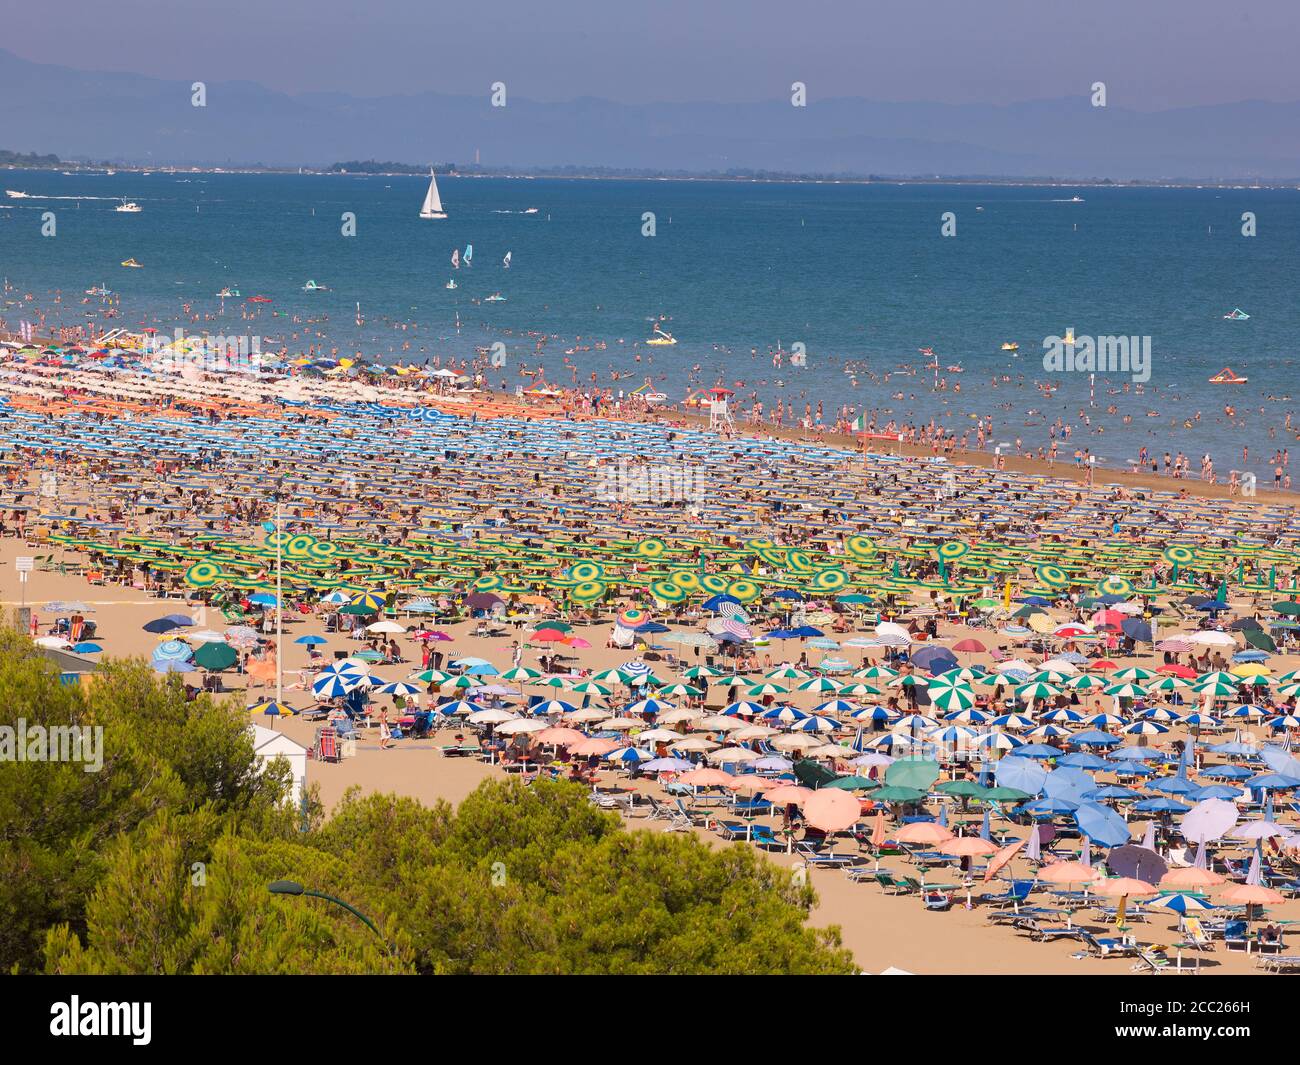 Italy, Udine, View of beach with sunshades Stock Photo